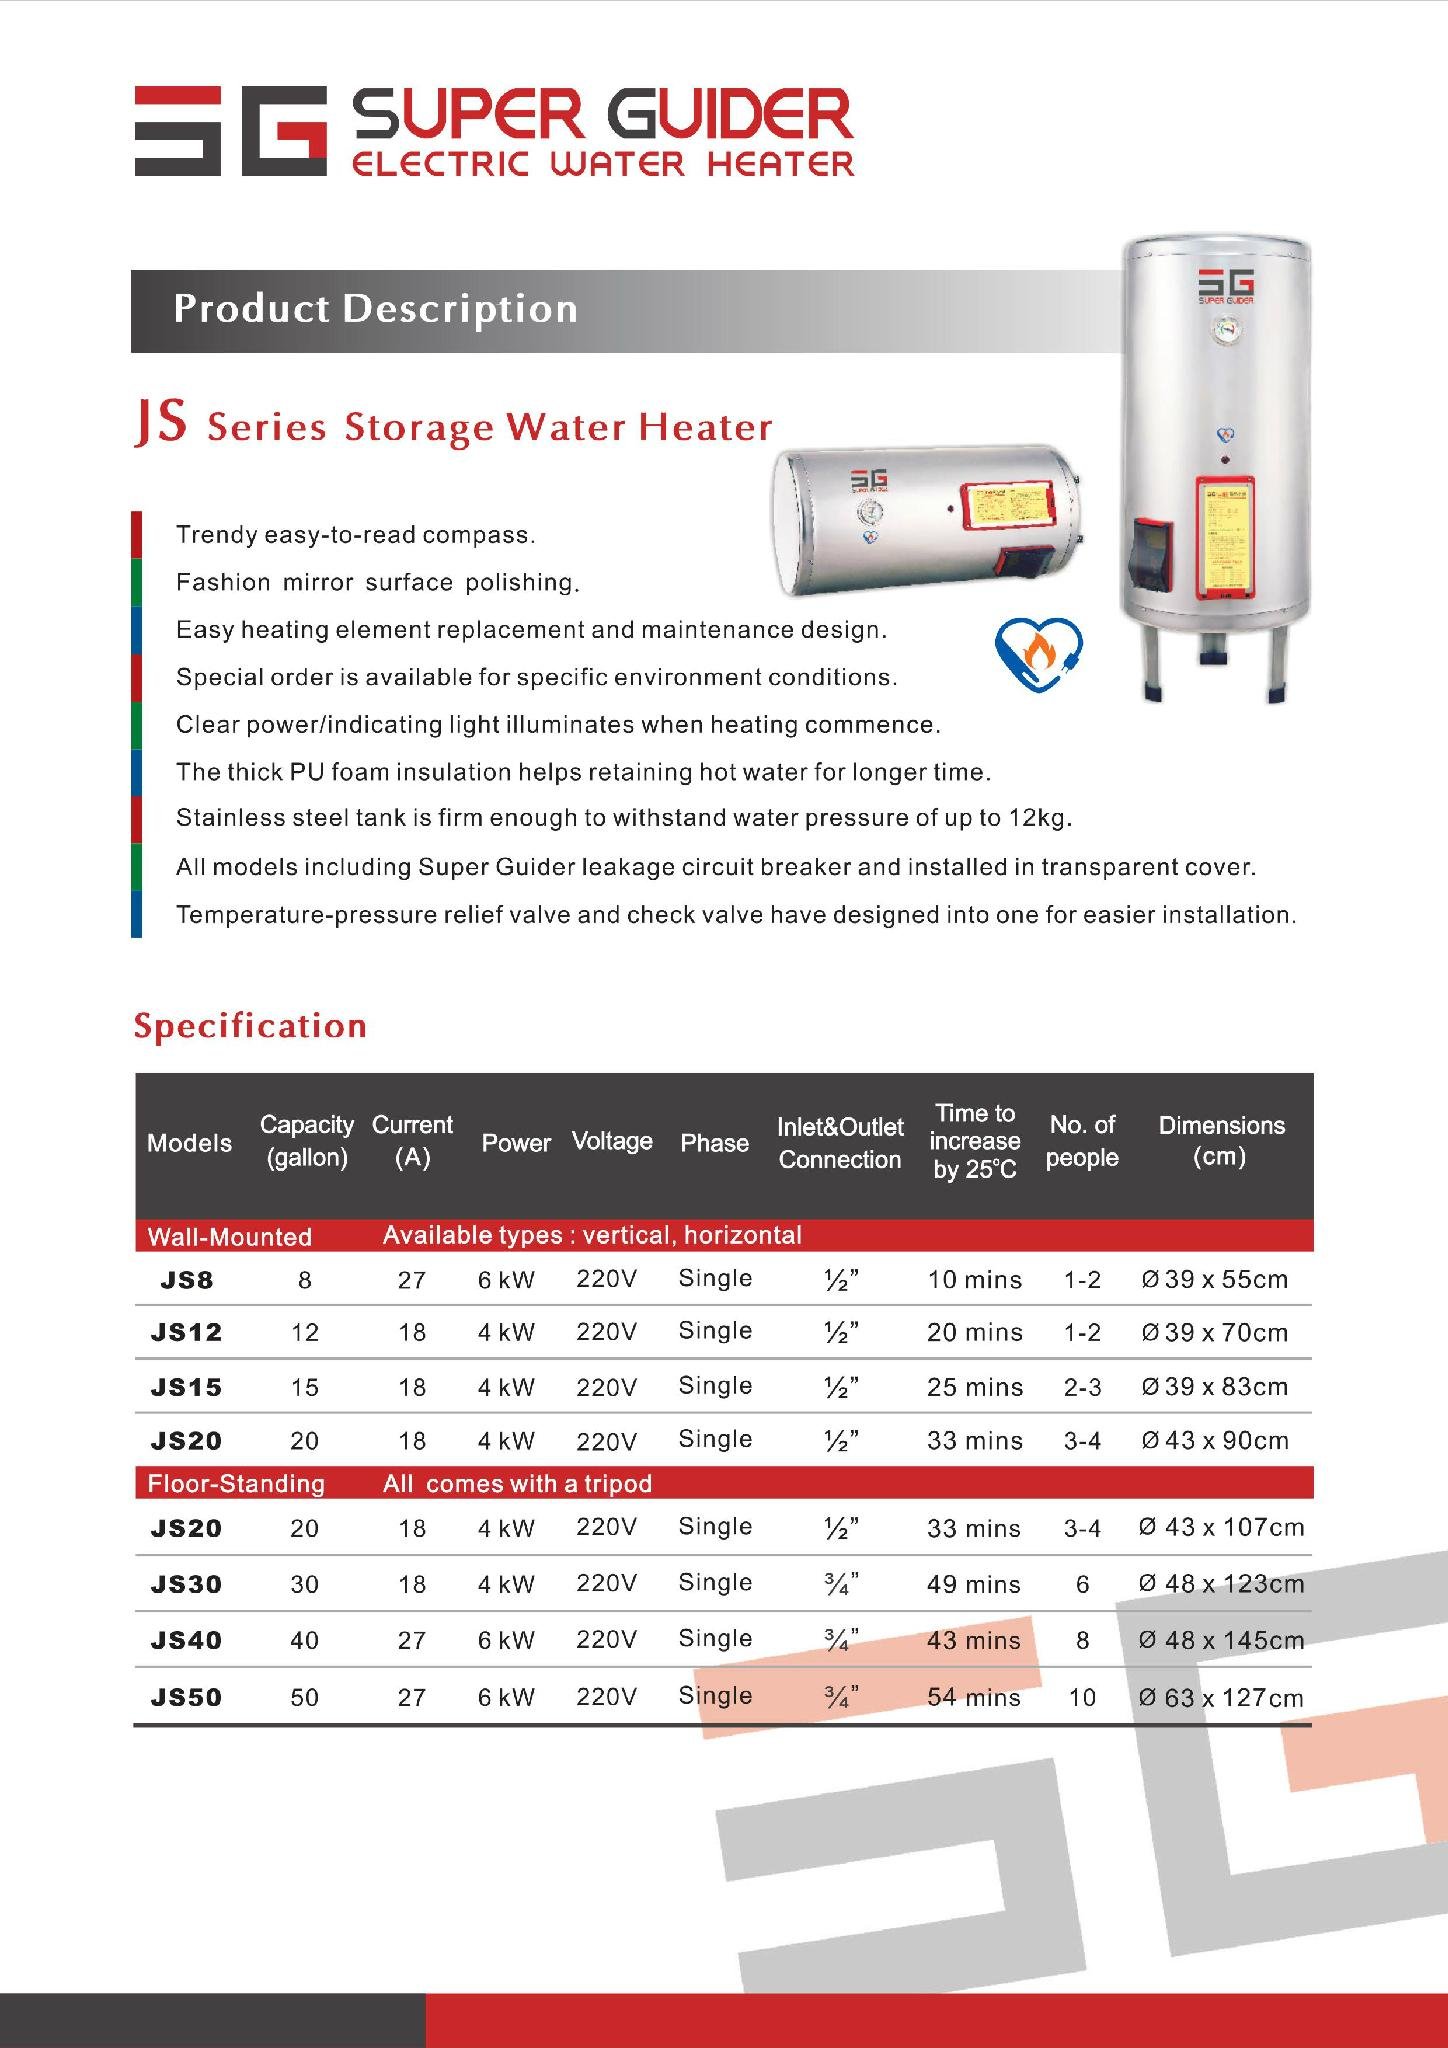 Super Guider Electric Water Heater Vertical-Wall Series JS20-AE 2